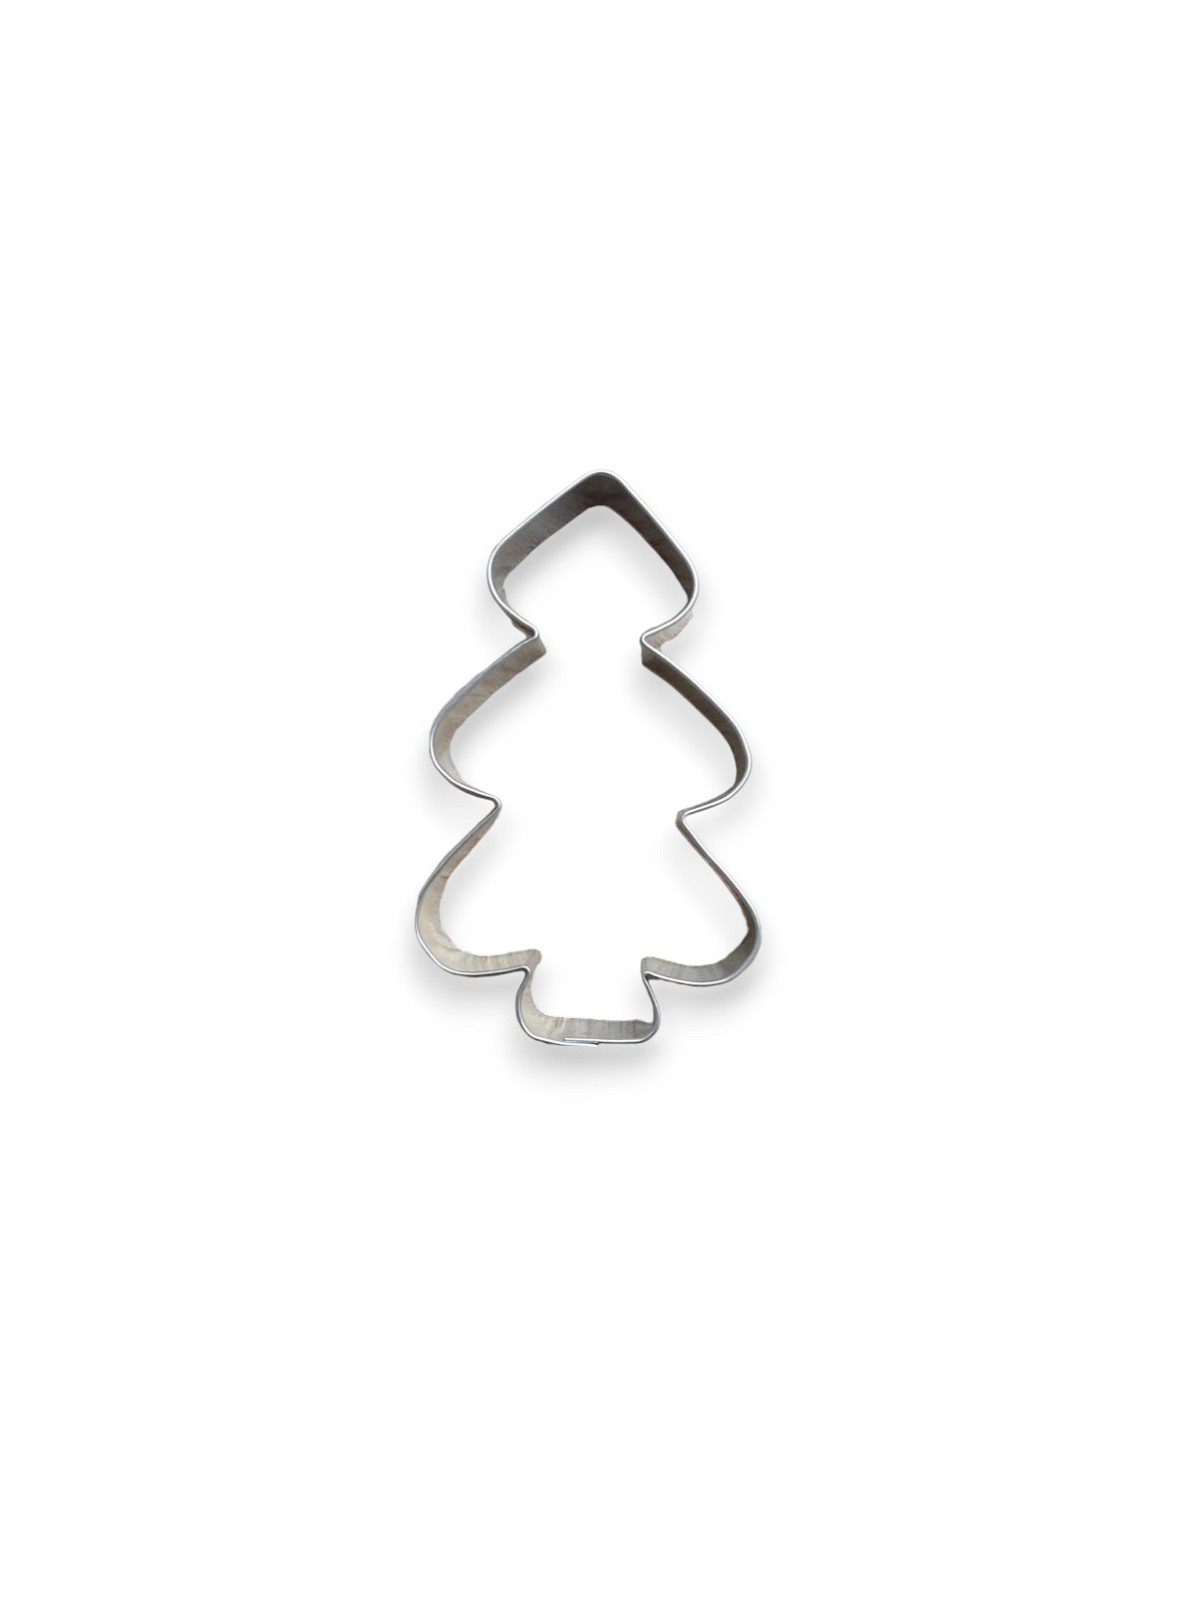 Cookie cutter - tree